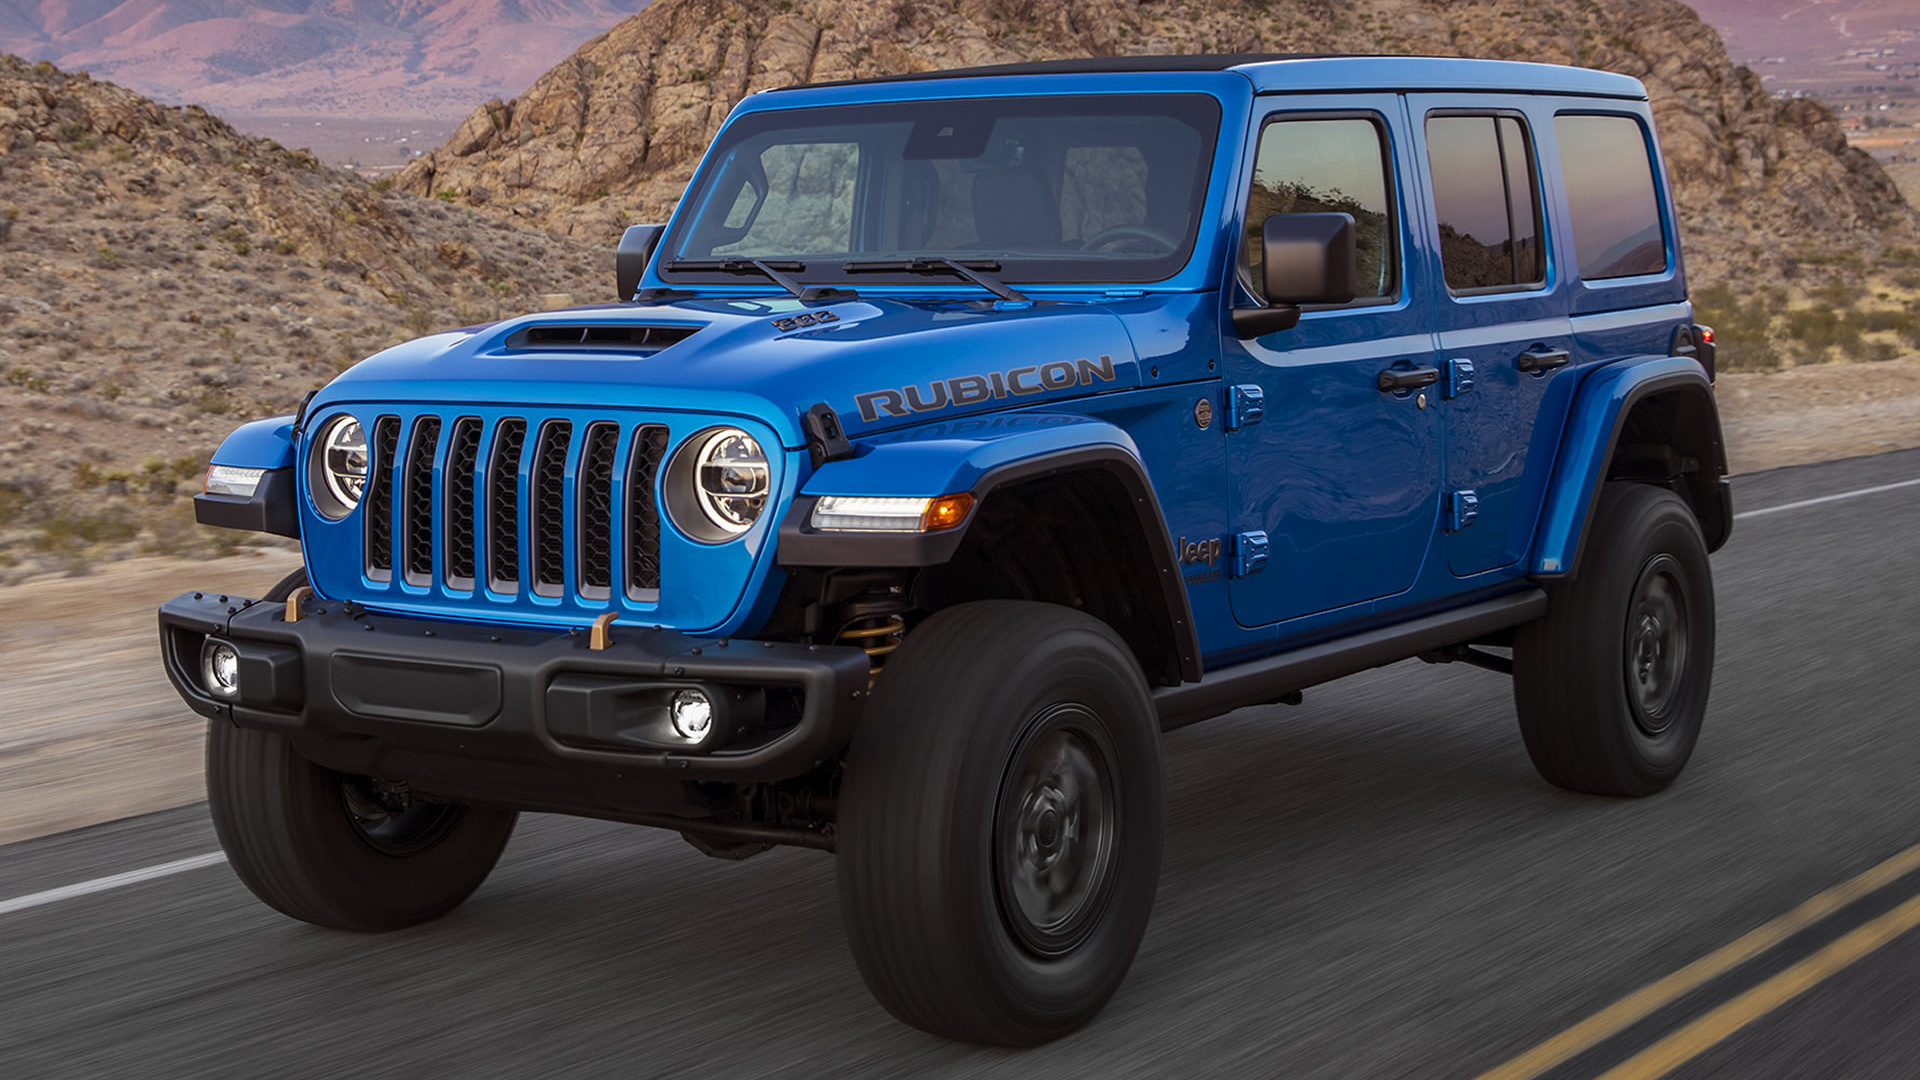 2021 Jeep Wrangler Unlimited Rubicon 392 - Wallpapers and HD Images